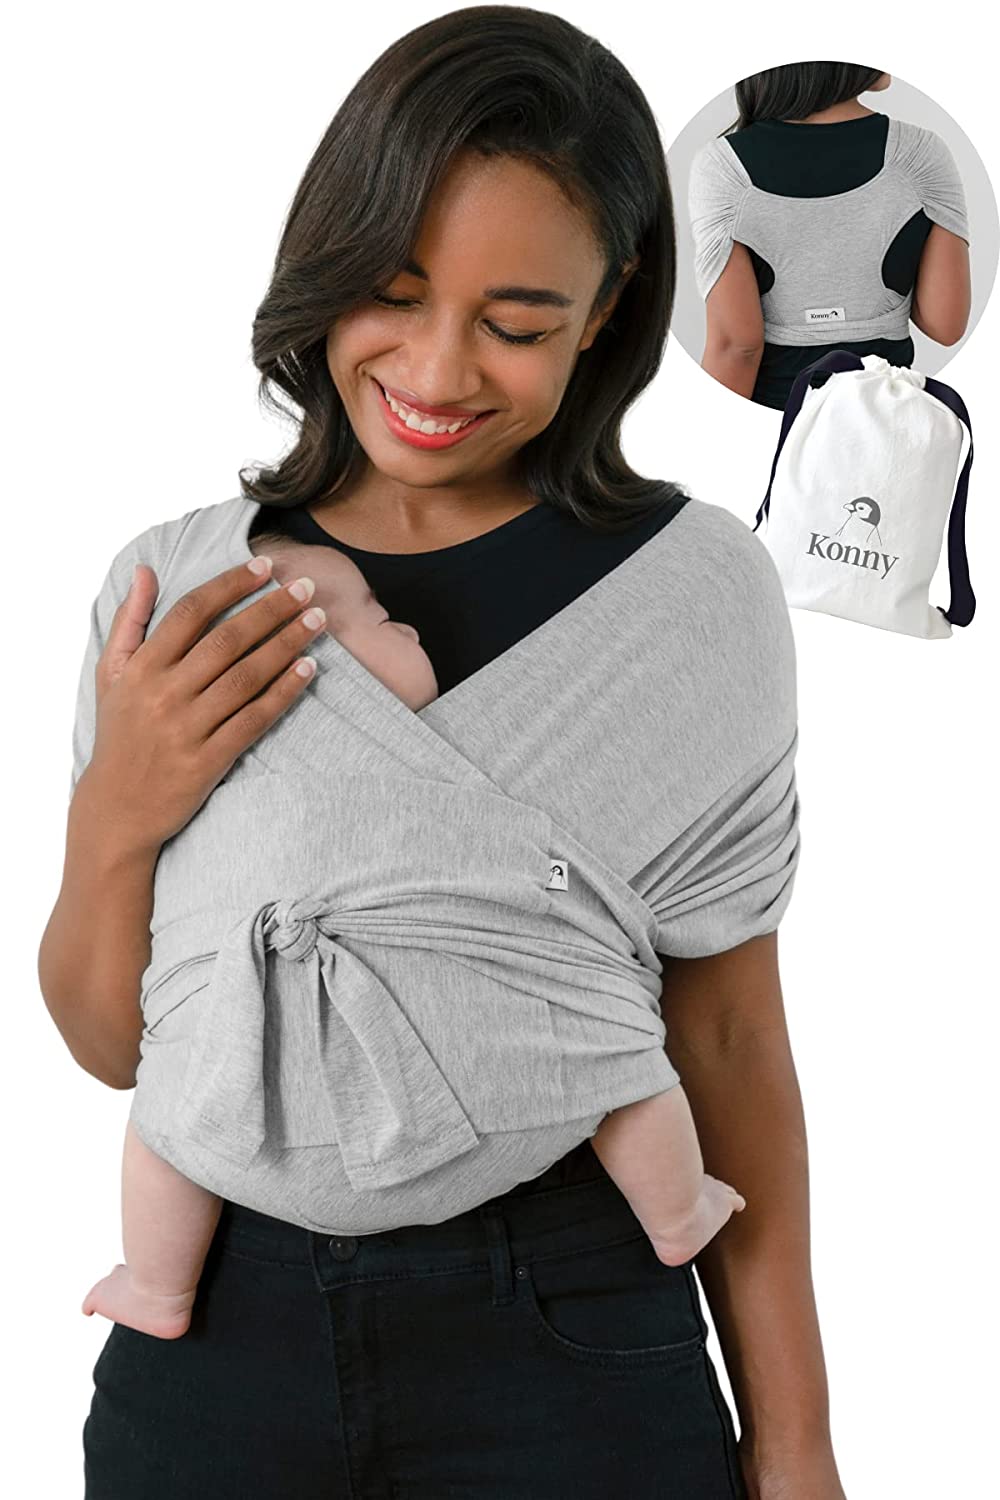 Konny Baby Carrier Ultralight, Stress-Free Sling for Newborns, Toddlers up to 20 kg, Soft and Breathable Fabric, Reasonable Sleep Solution